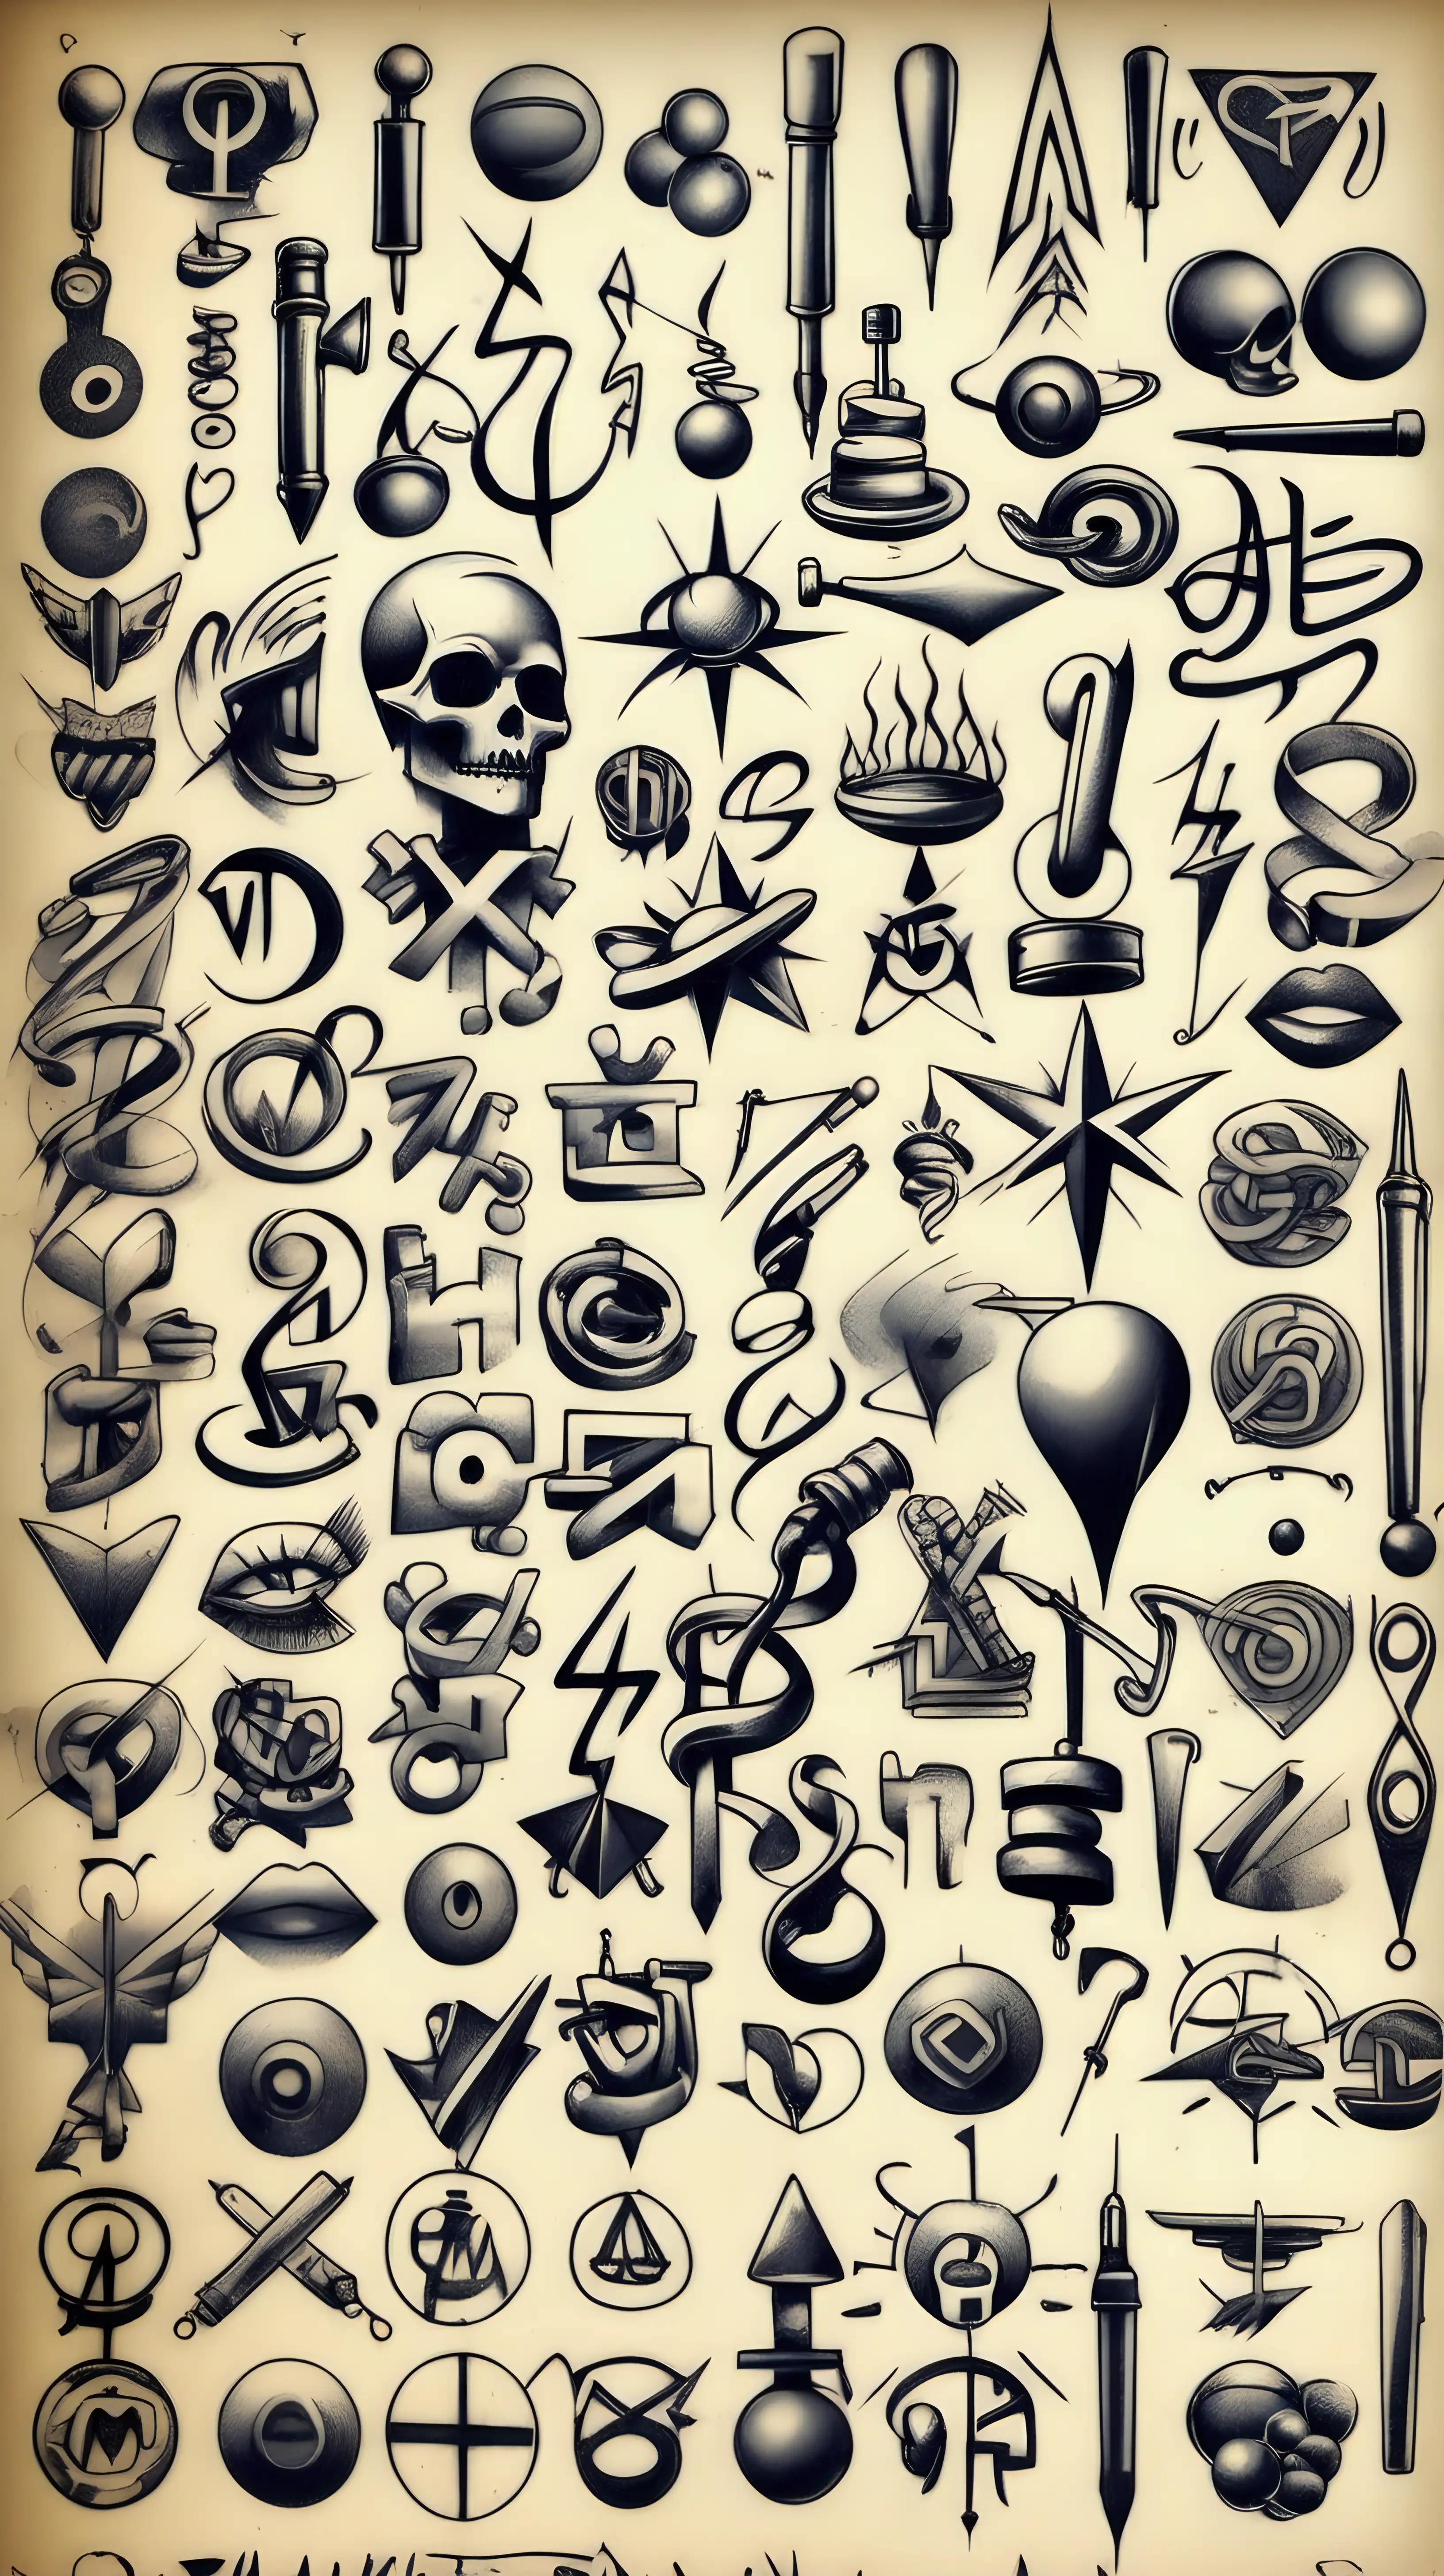 Collection of 100 Vintage Graffiti and Tattoo Symbols in Ballpoint Pen